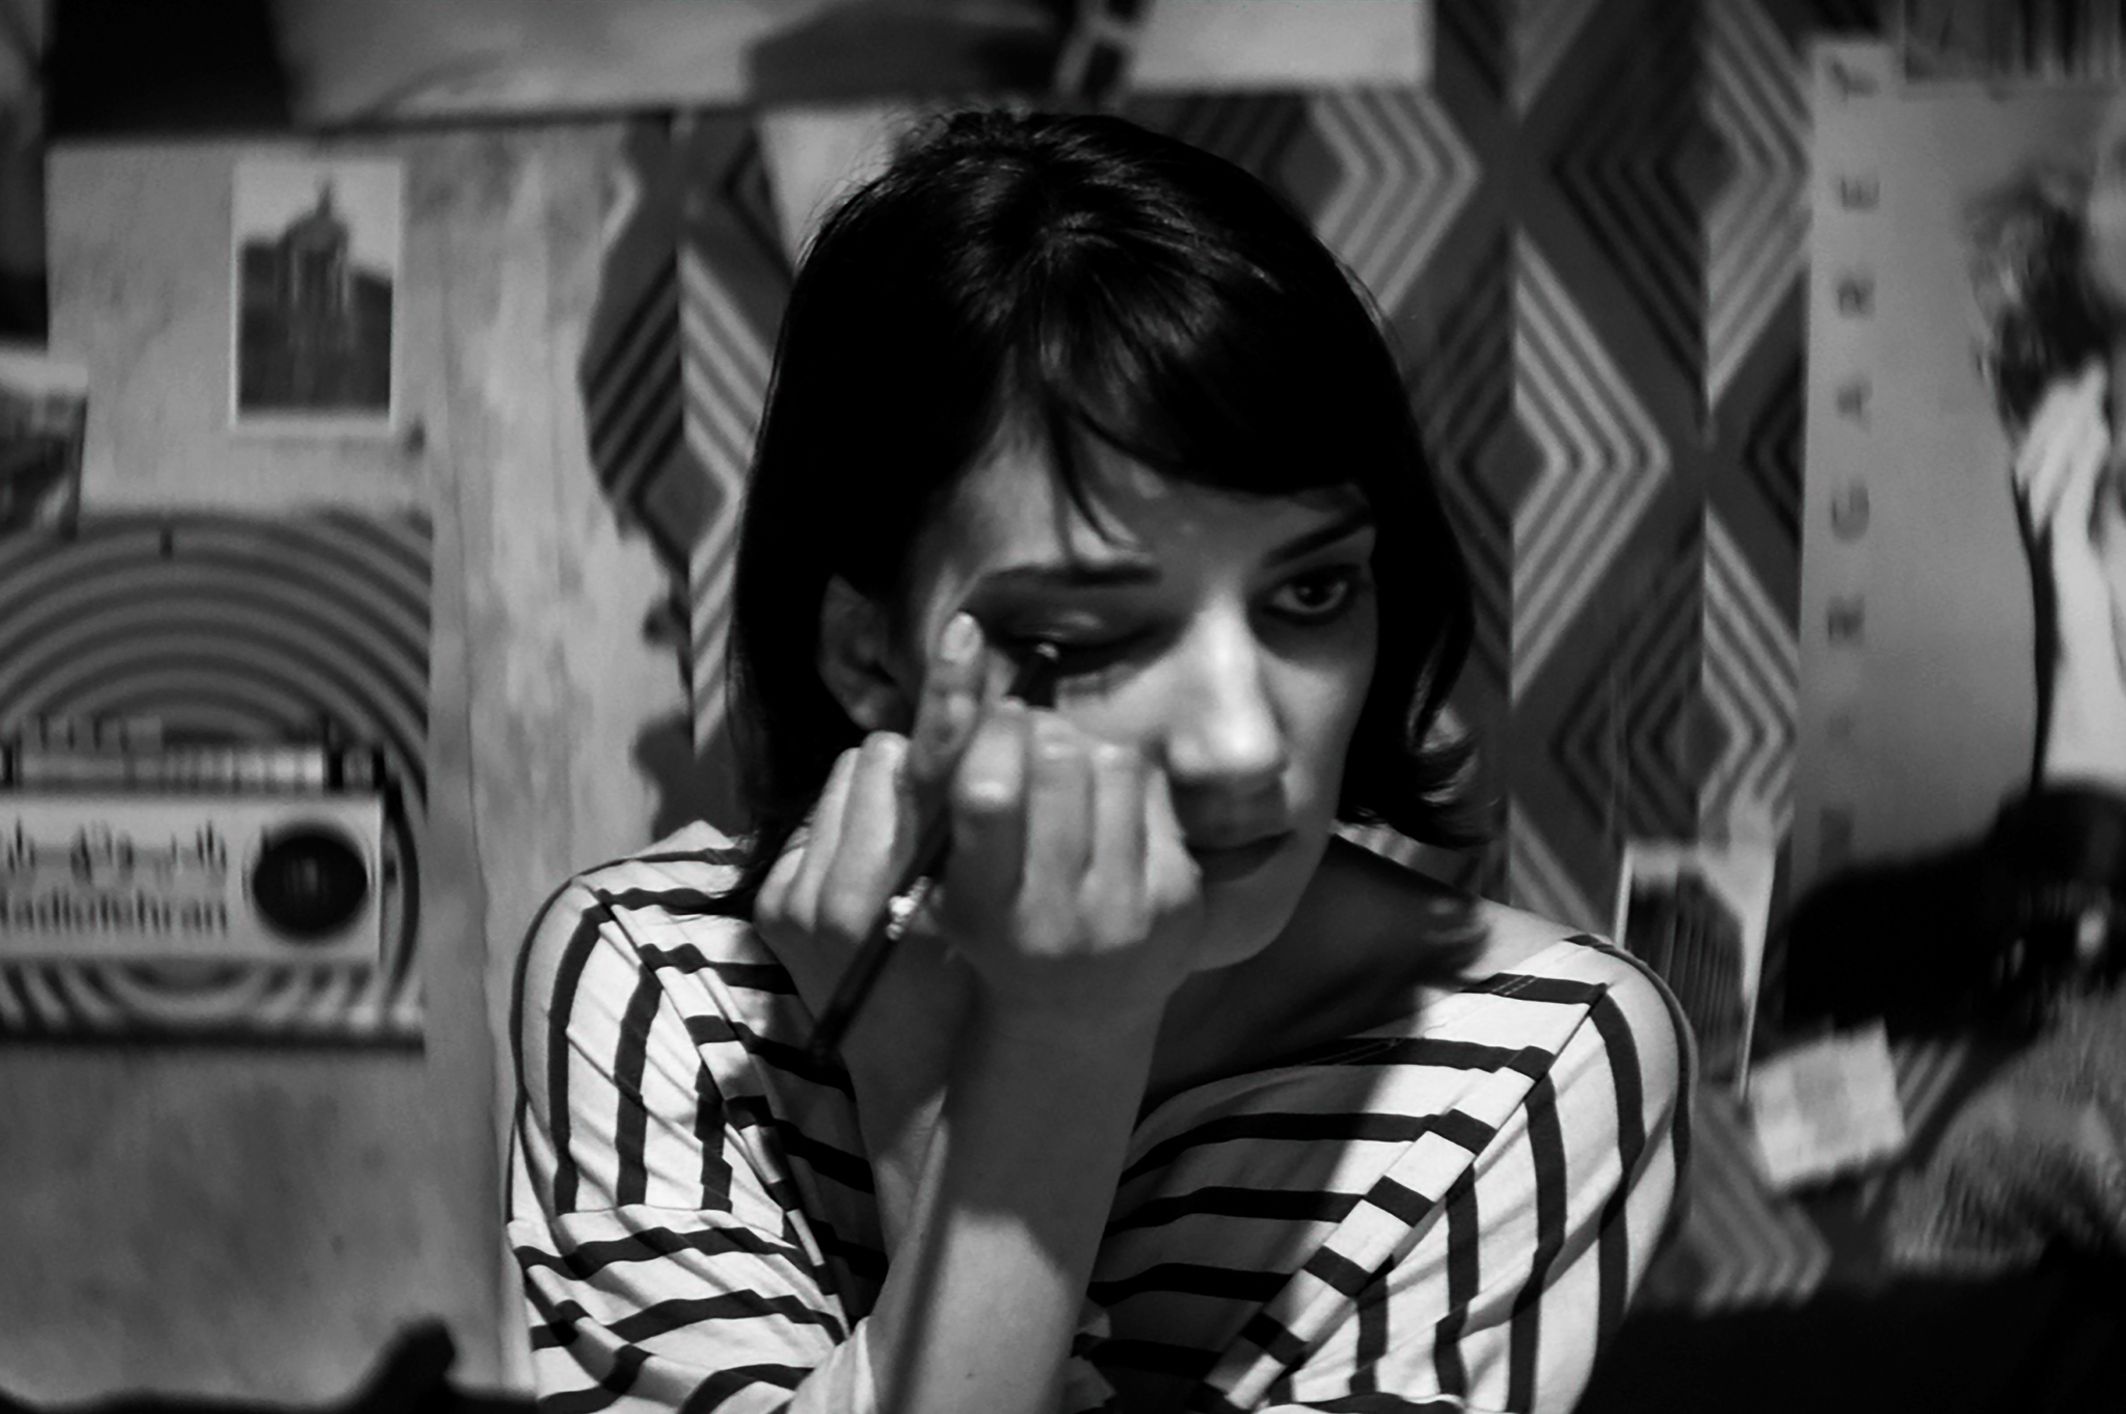 They at home last night. A girl walks Home Alone at Night, 2014. Девушка Возвращение фото. Девушка возвращается одна ночью домой (2014).